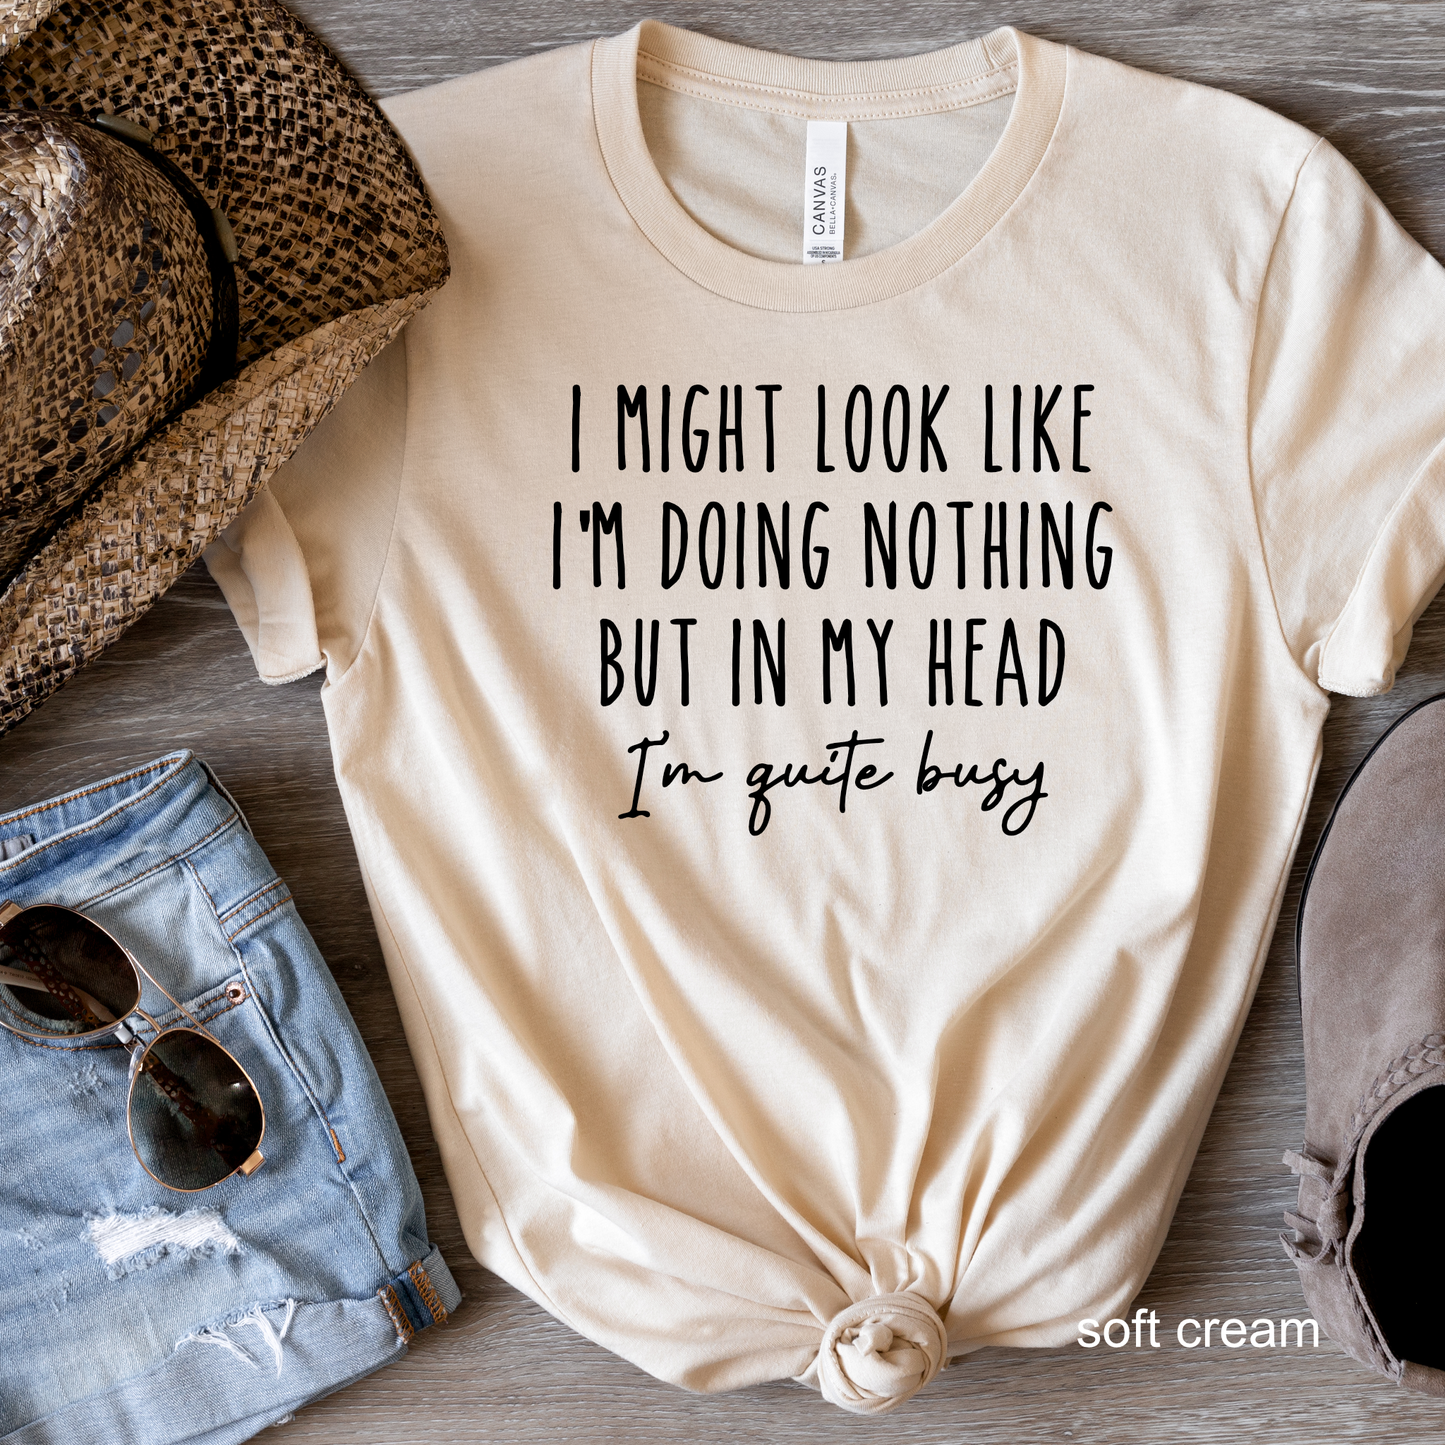 I Might Look like I'm Doing Nothing, But in my Head I'm Quite Busy -  Funny Tee